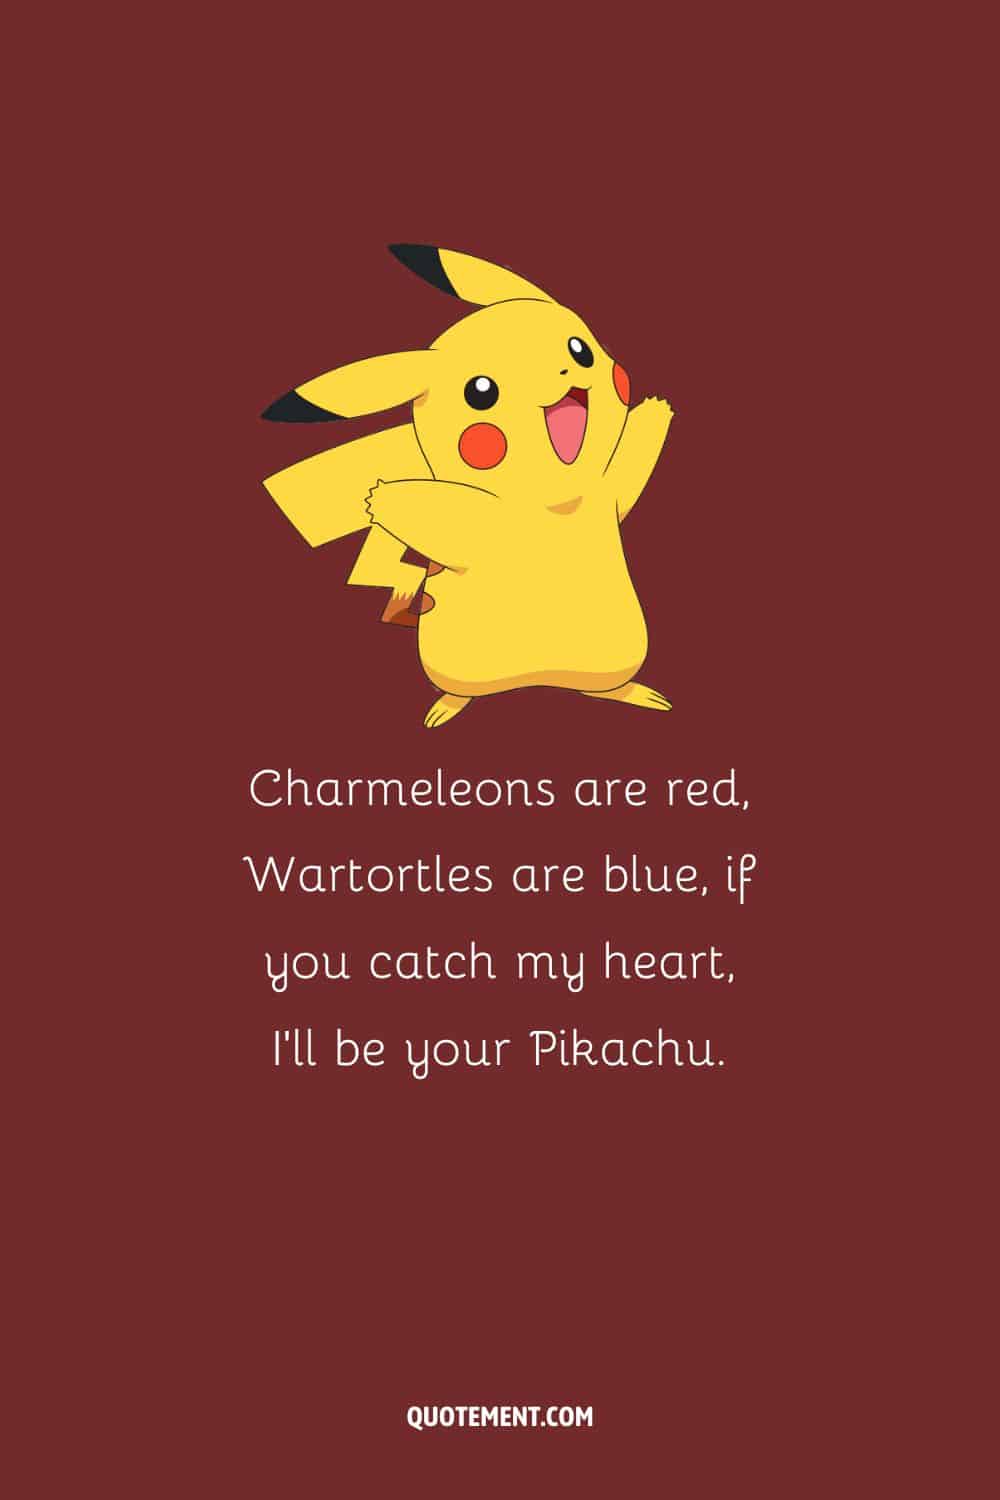 Pick up line for a crush who loves Pokemon, and the image of Pikachu